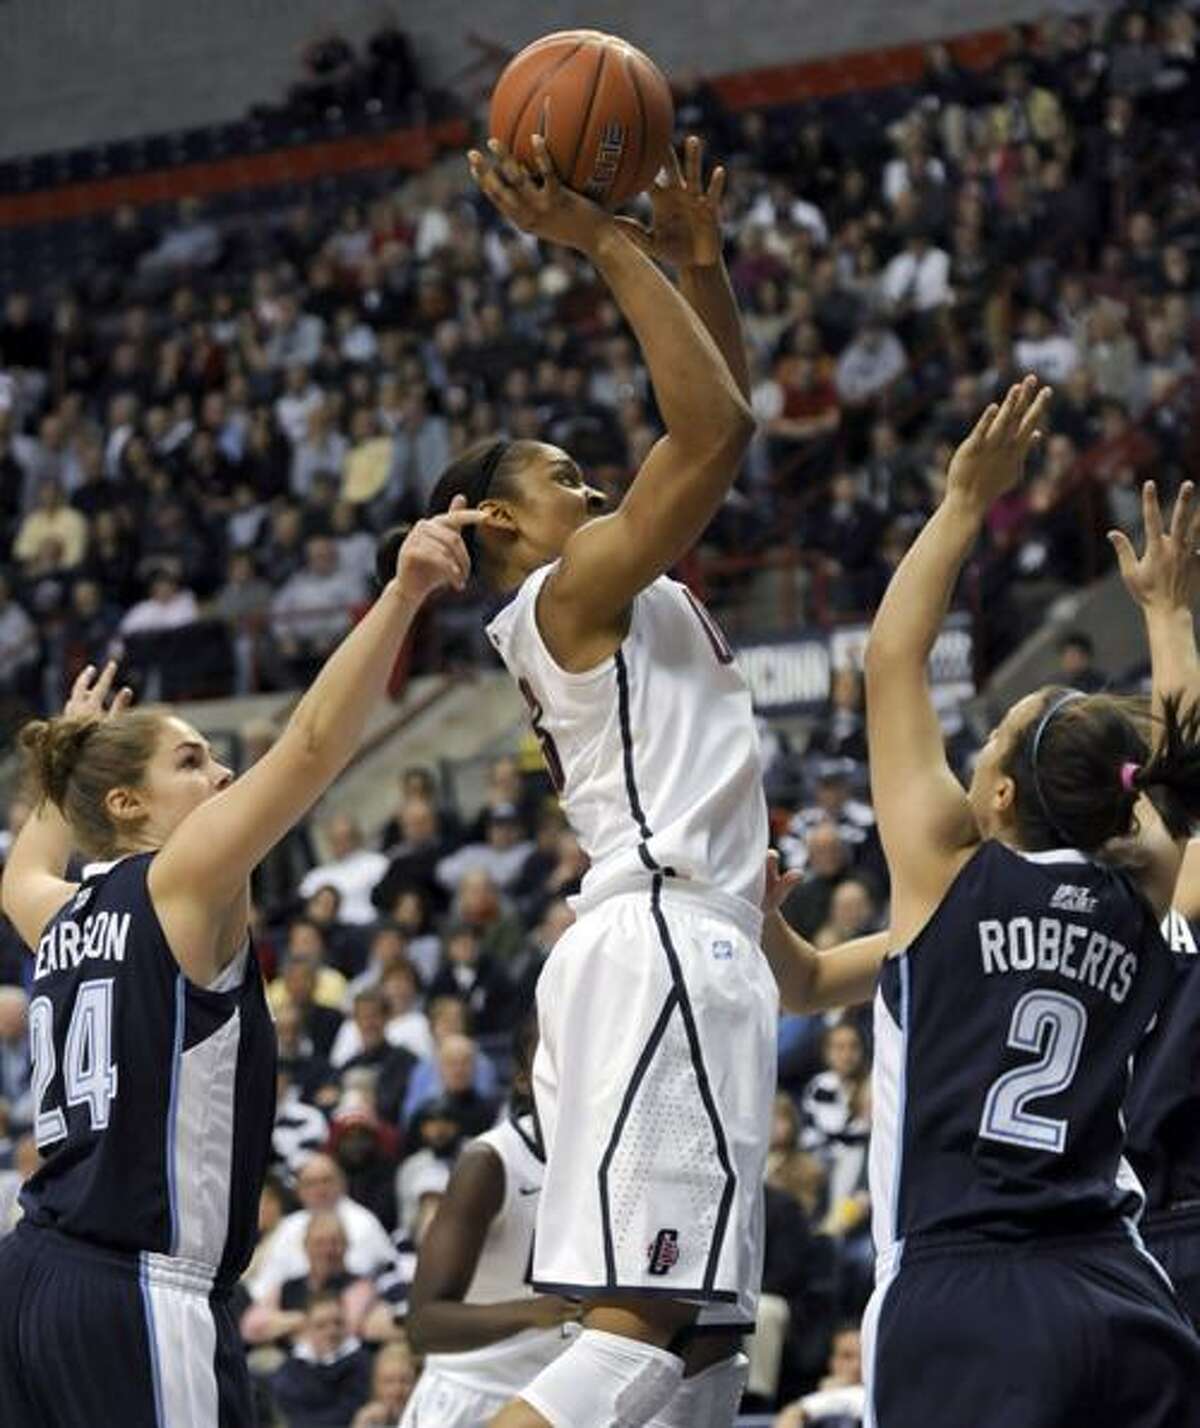 Connecticut's Maya Moore takes a one-hander goes up for a shot as Villanova's Megan Pearson, left, and Rachel Roberts, right, defend during the first half of an NCAA college basketball game in Storrs, Conn., Wednesday, Jan. 5, 2011. (AP Photo/Bob Child)